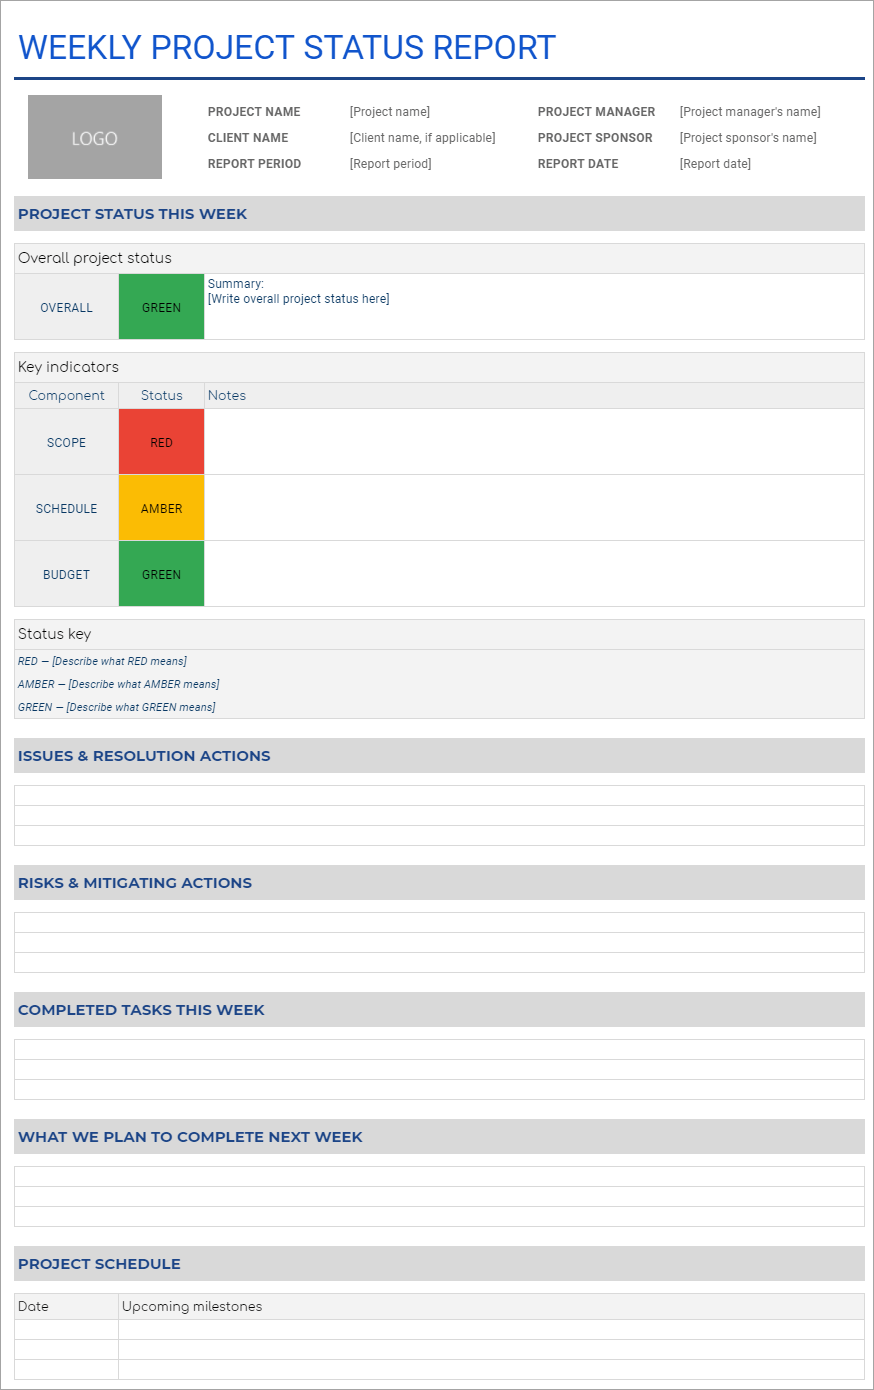 Project Status Report Template in Google Sheets  Coupler.io Blog